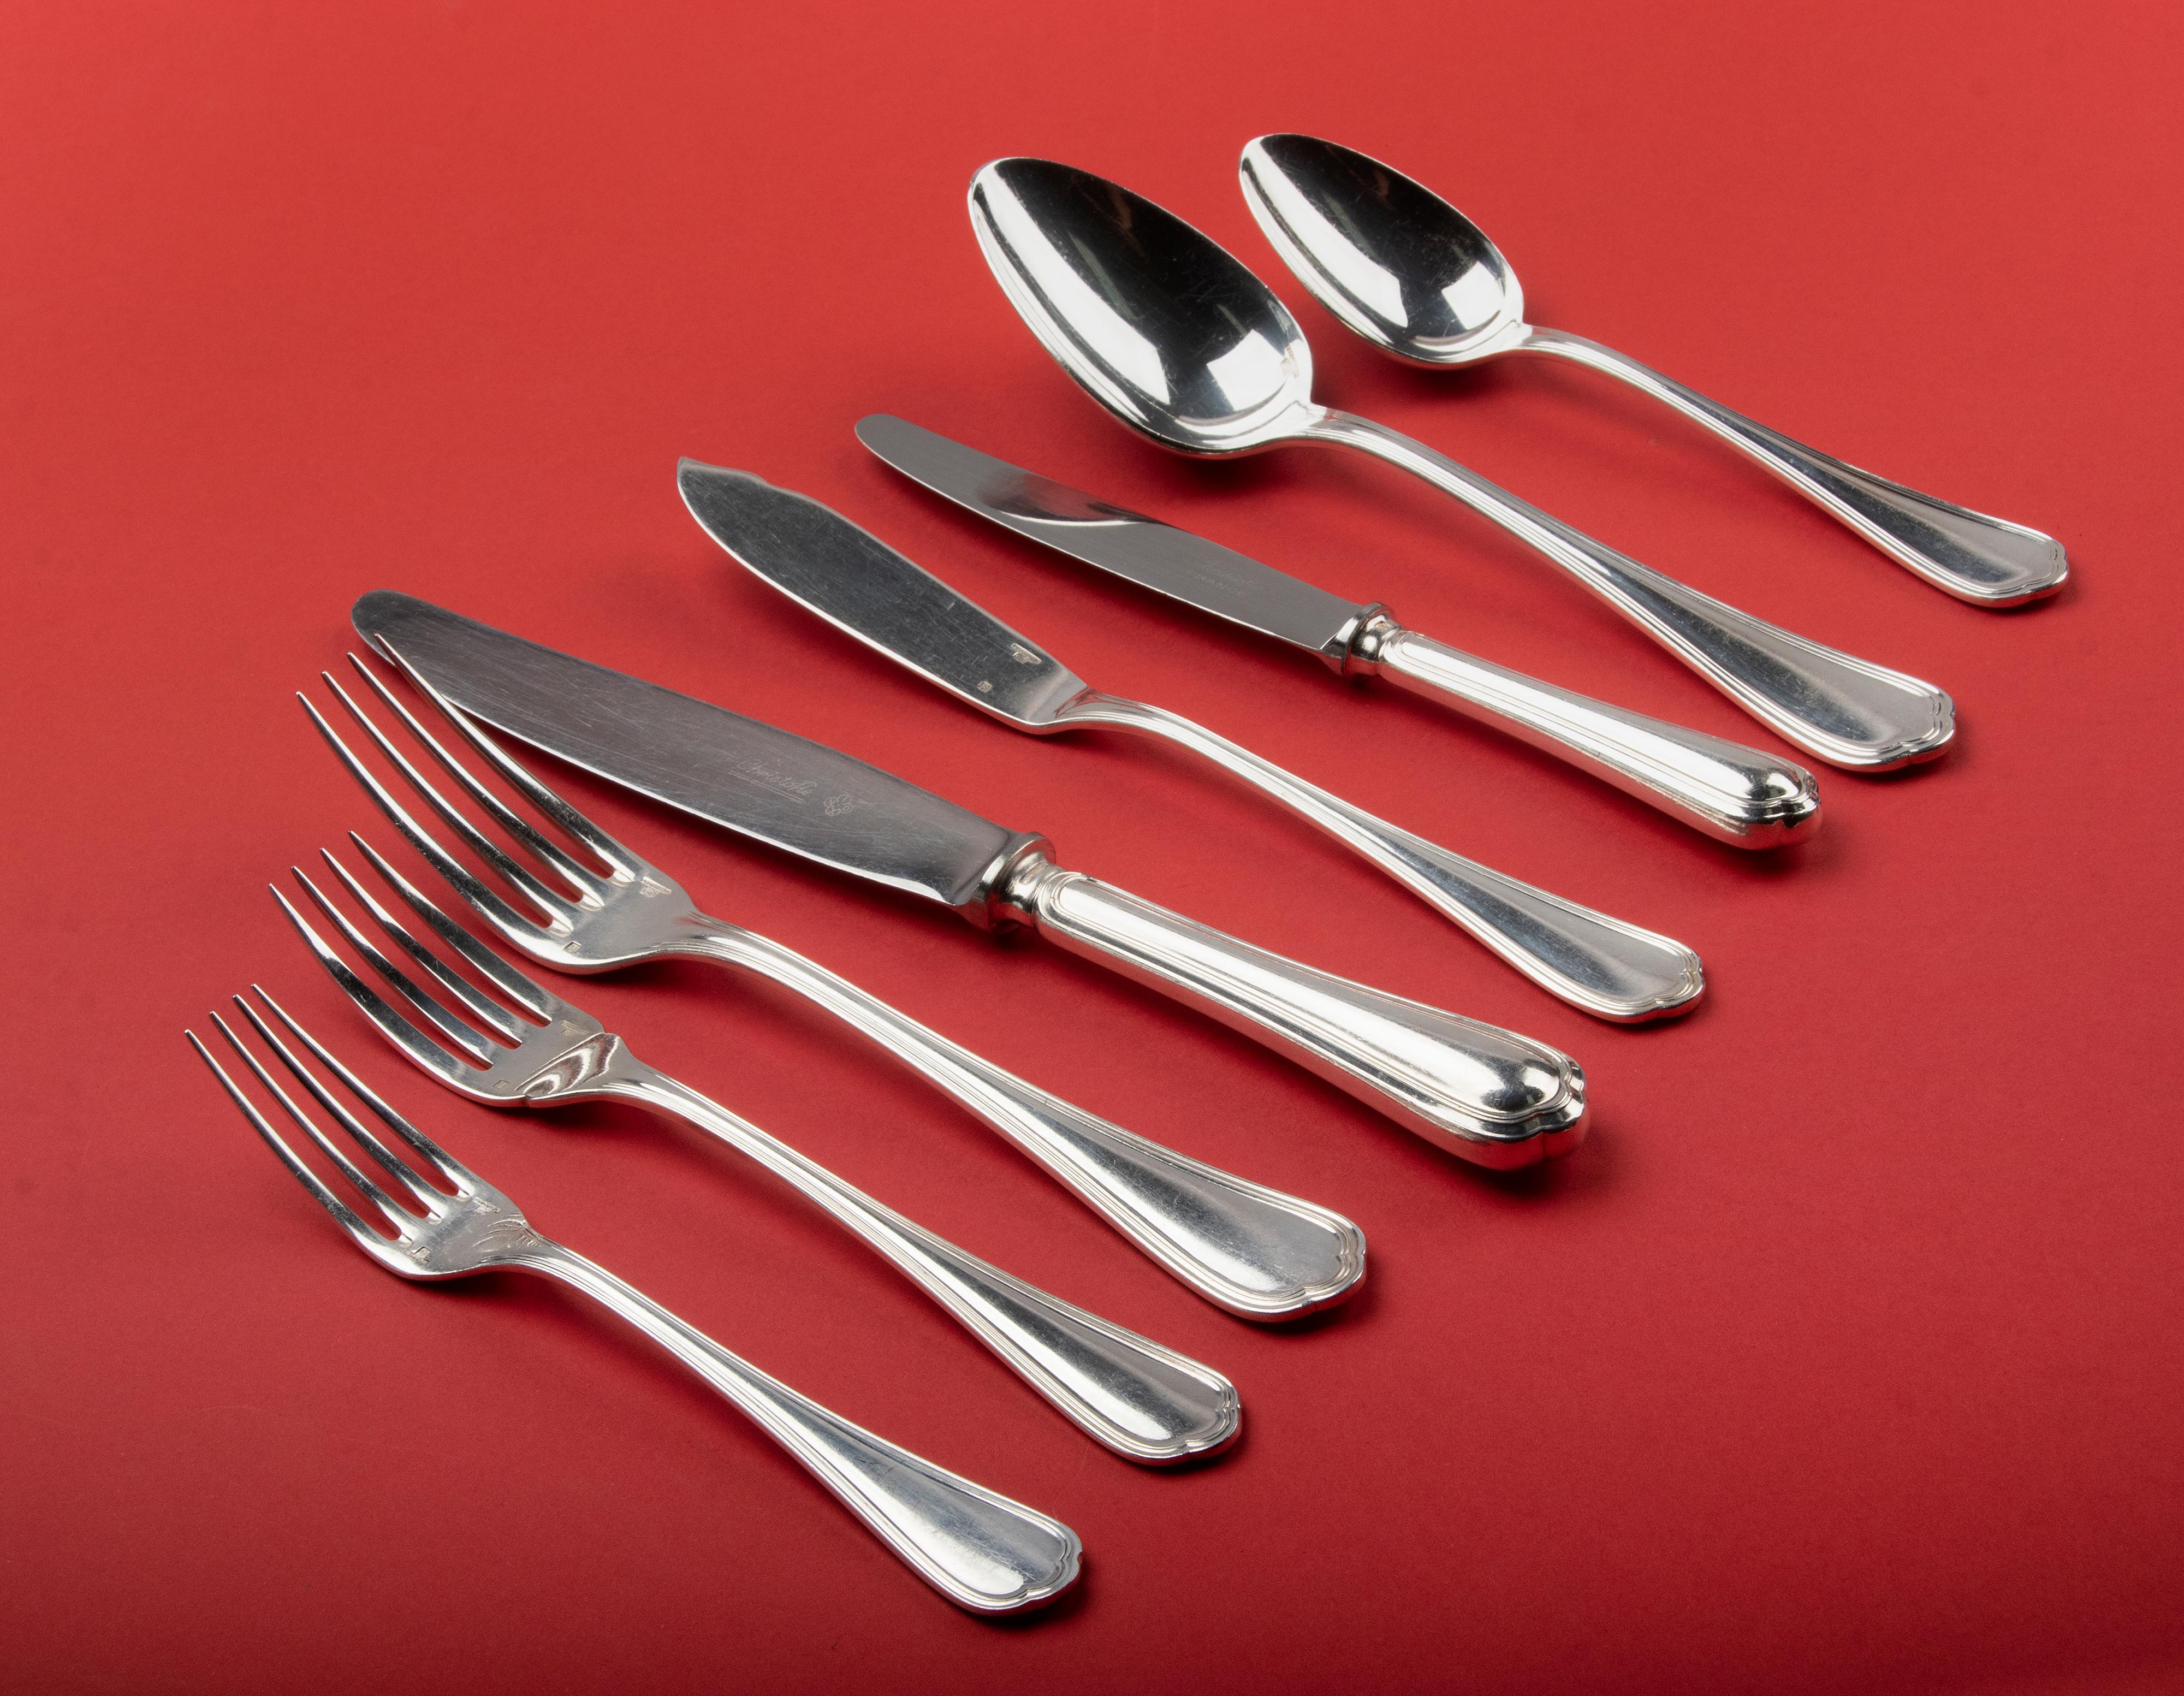 96-Piece Set of Silver Plated Flatware by Christofle Model Spatours 6